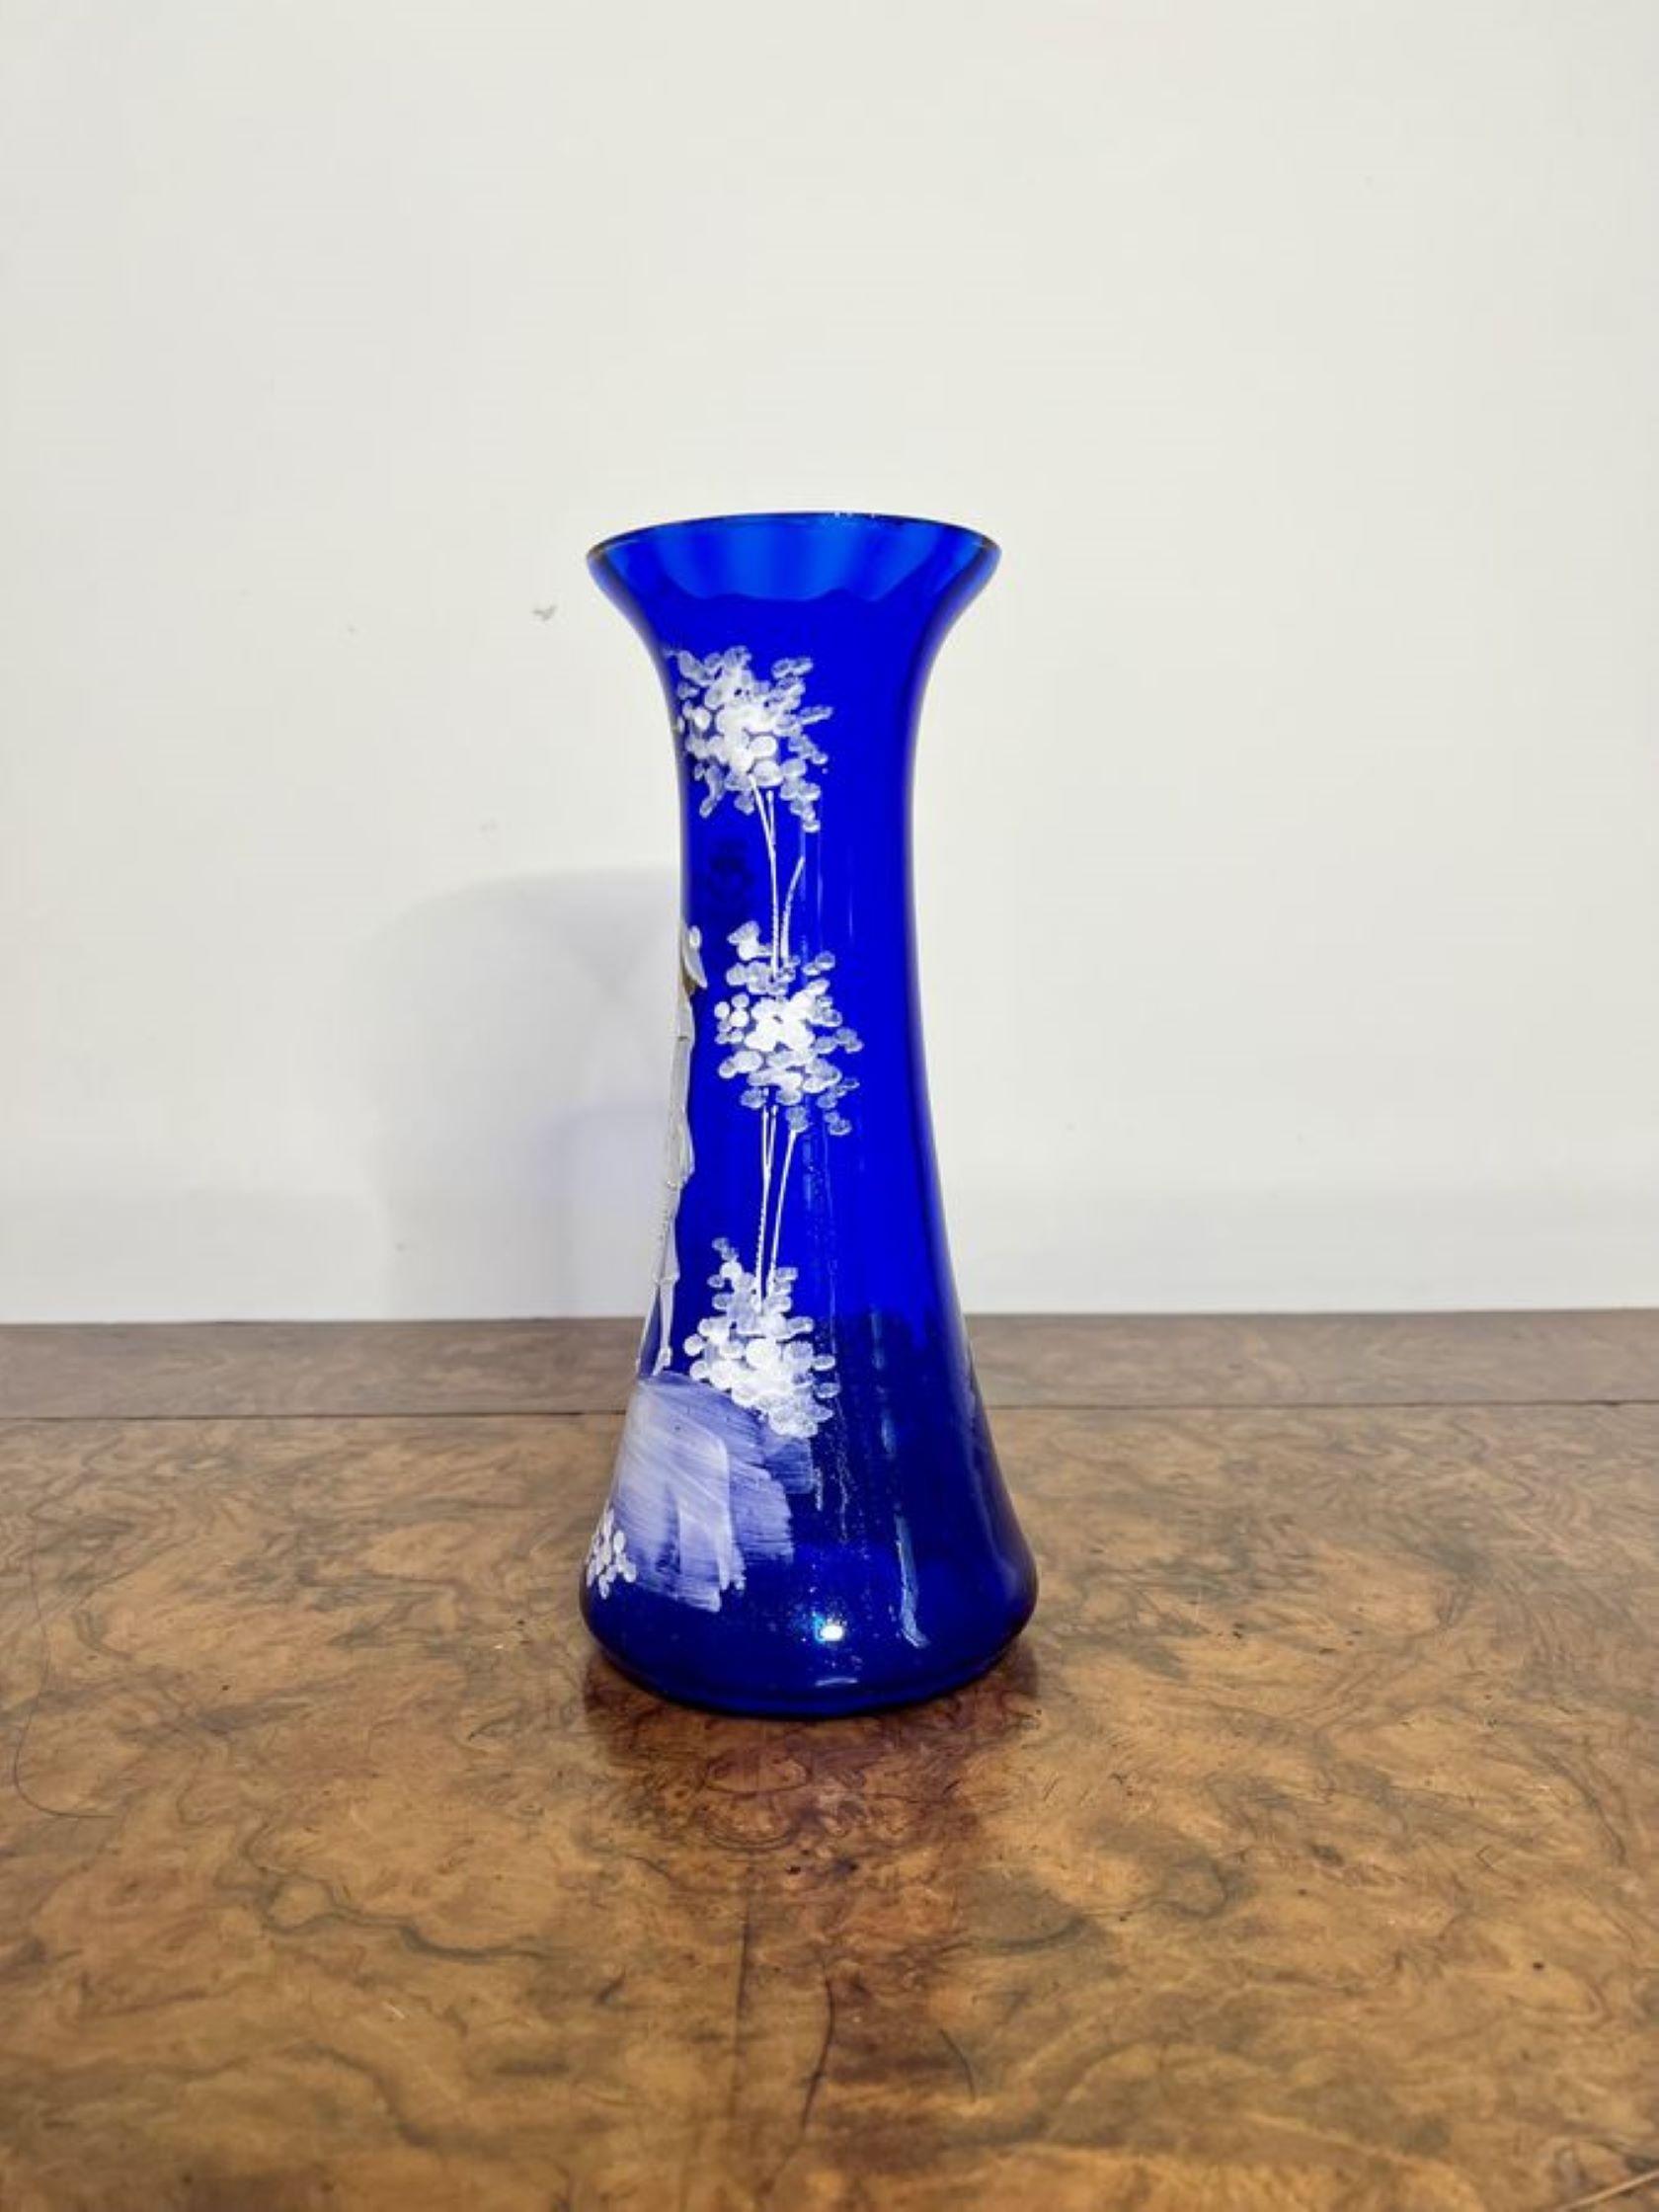 Stunning quality antique Mary Gregory blue glass vase having a stunning quality Mary Gregory blue glass vase with white enamel decoration.

D. 1890